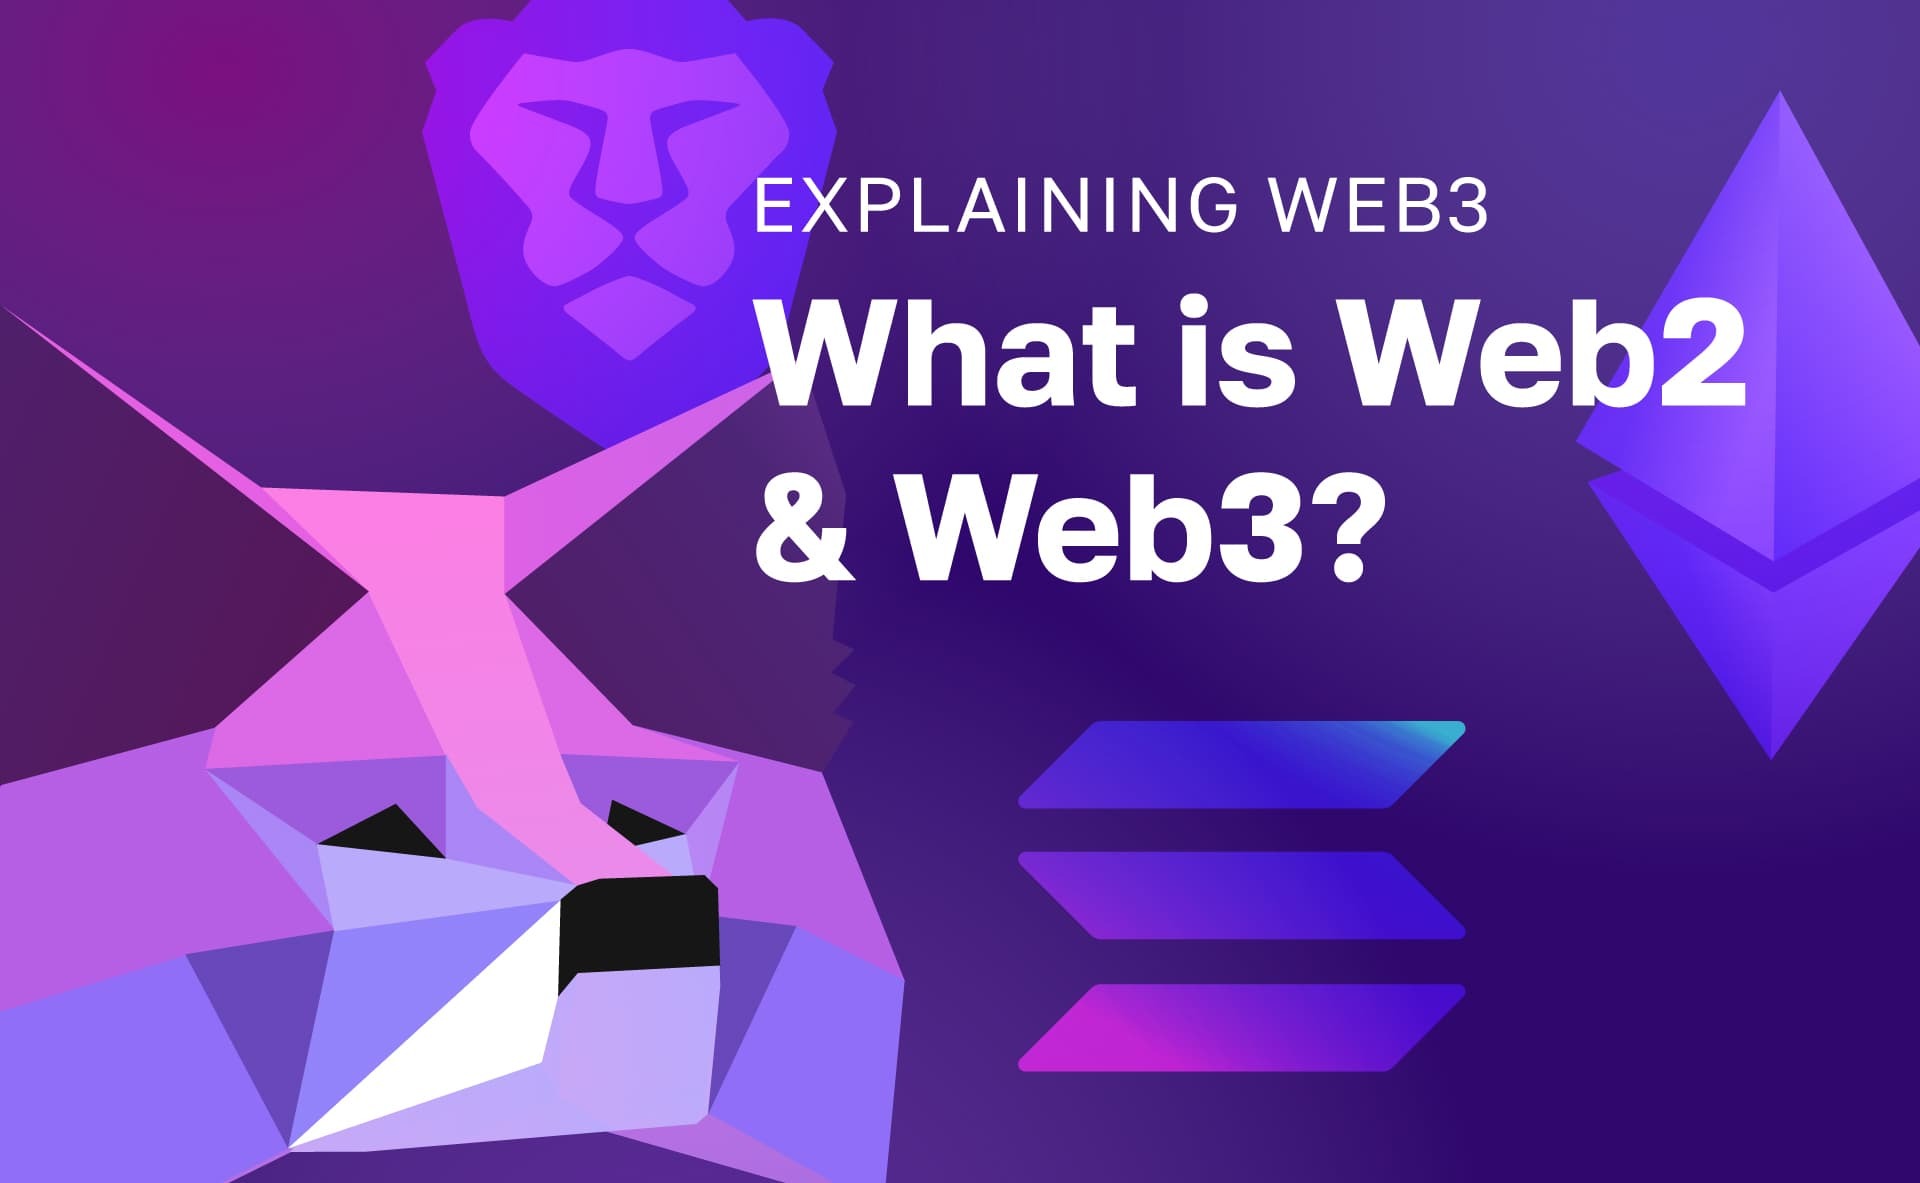 22_04_What-is-Web2-and-Web3-Explaining-Web3